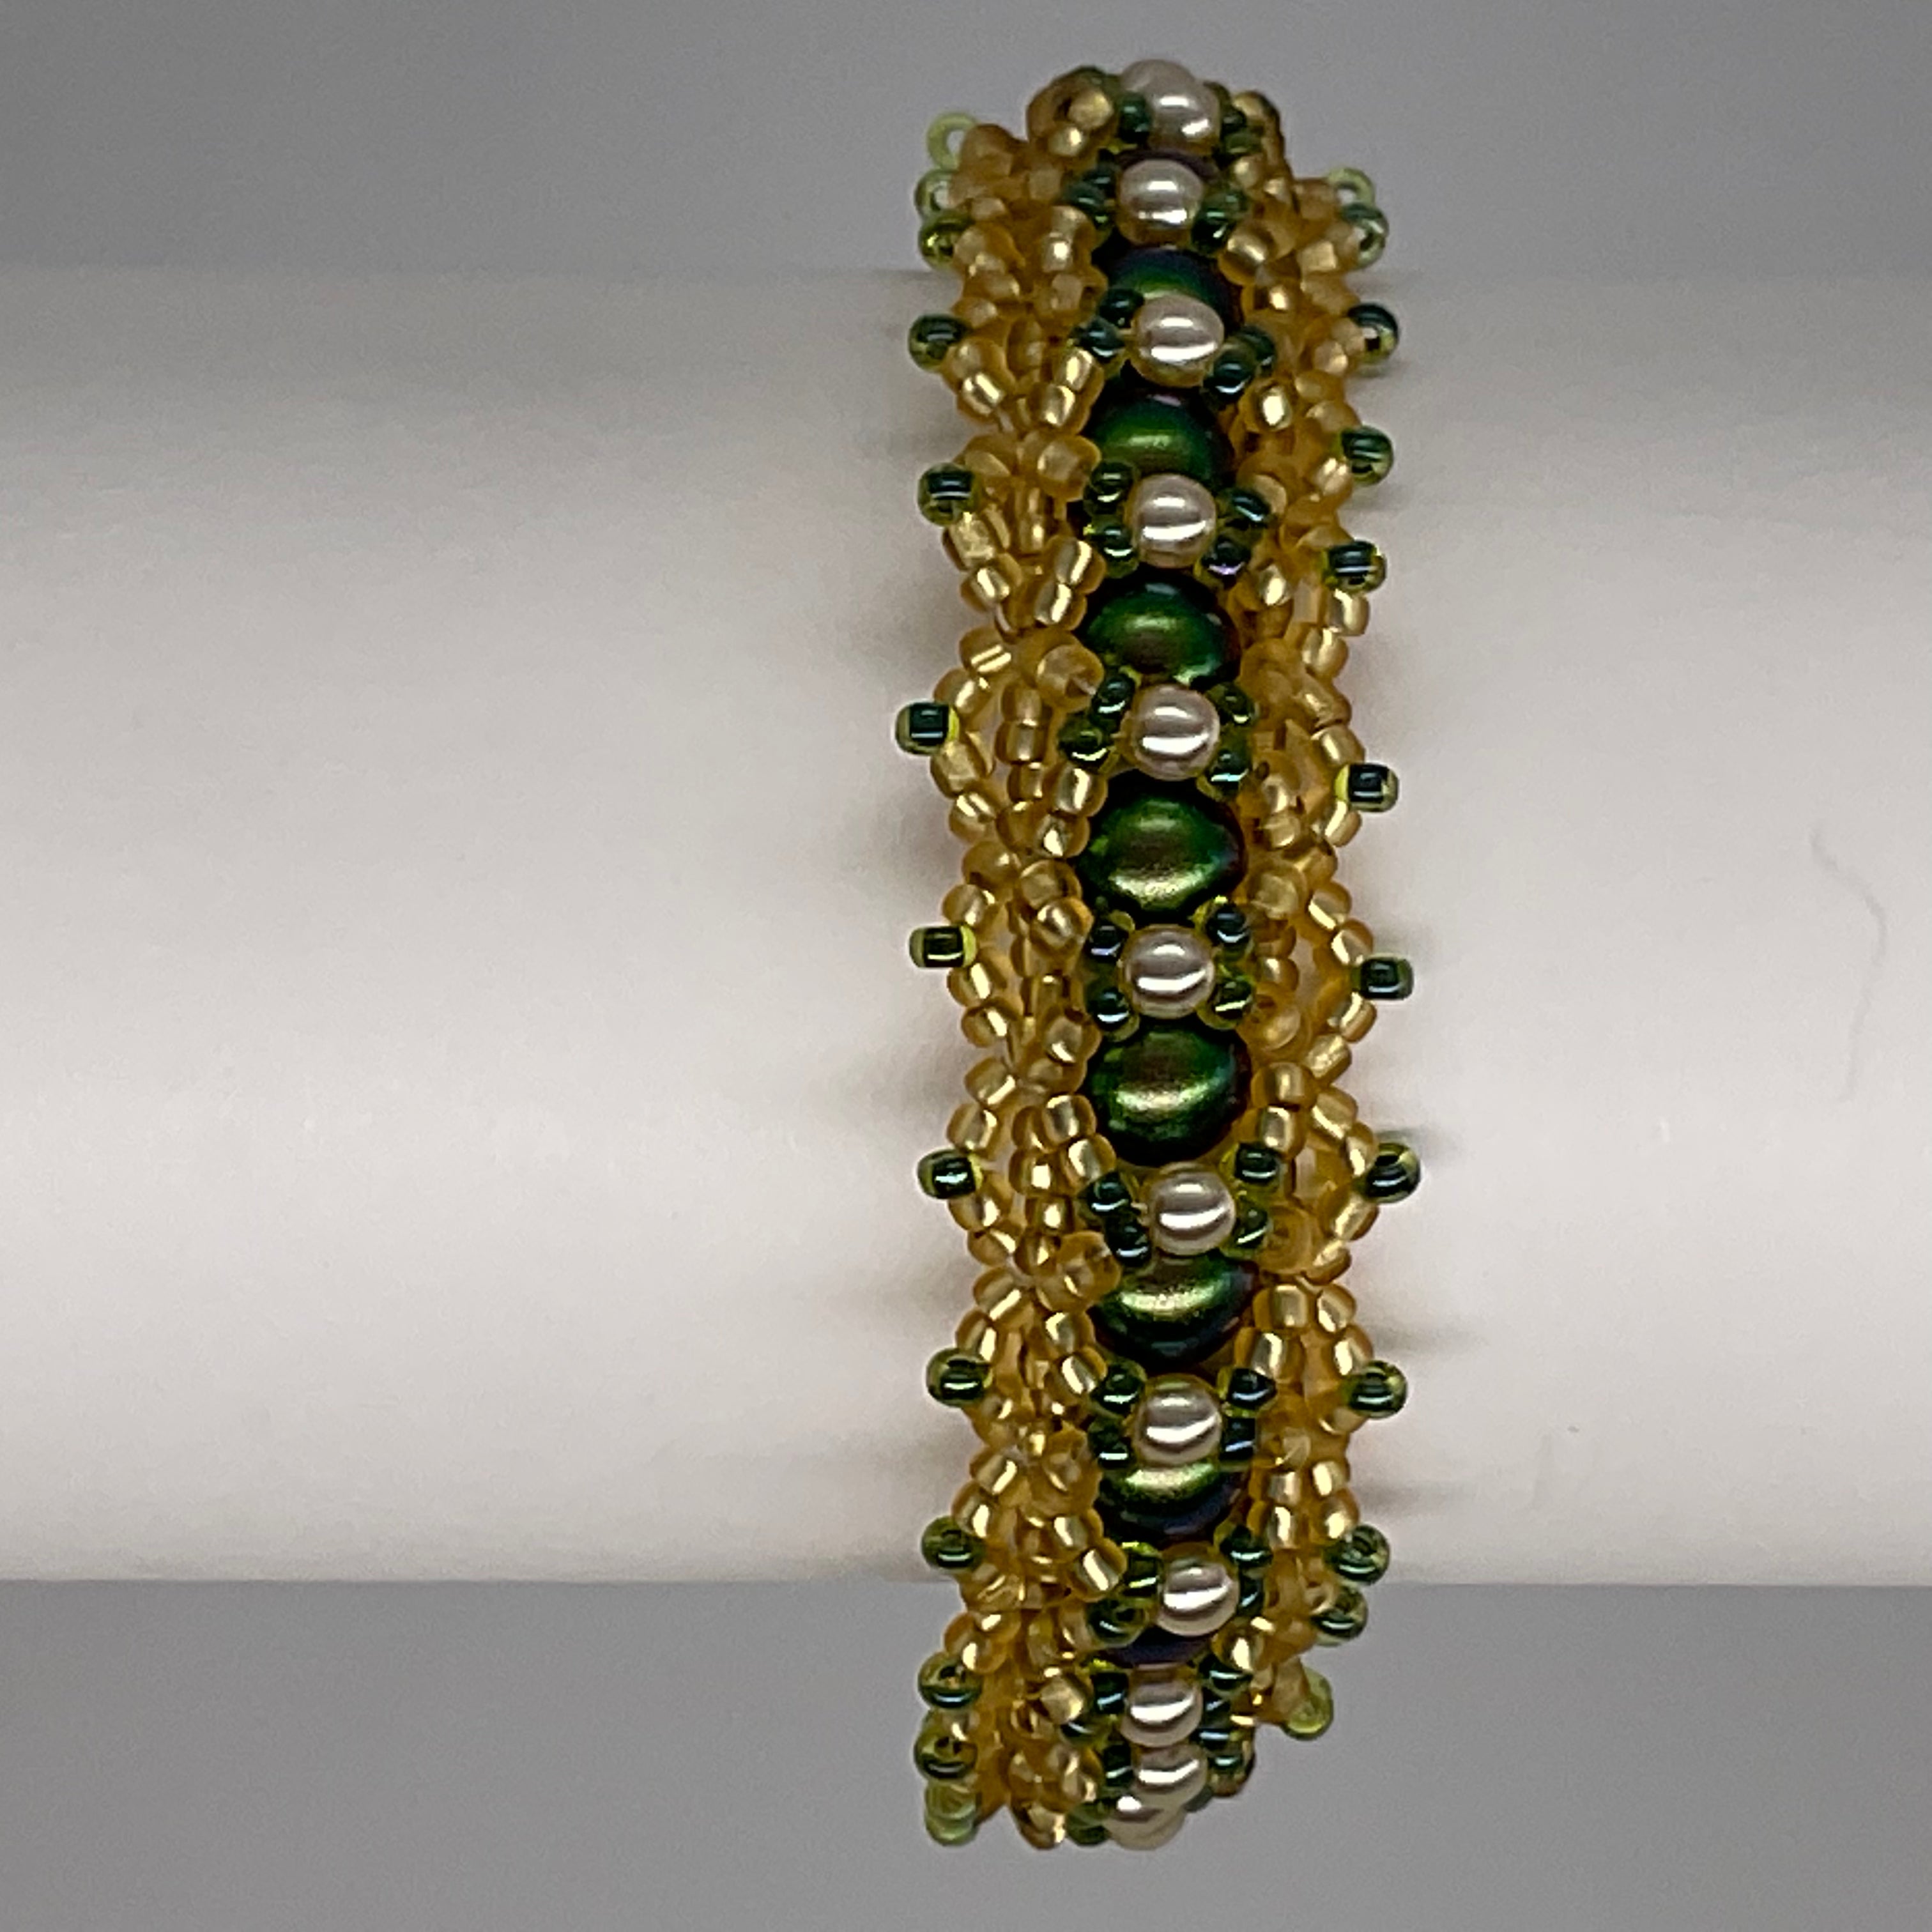 Green and Gold Pearly Bracelet